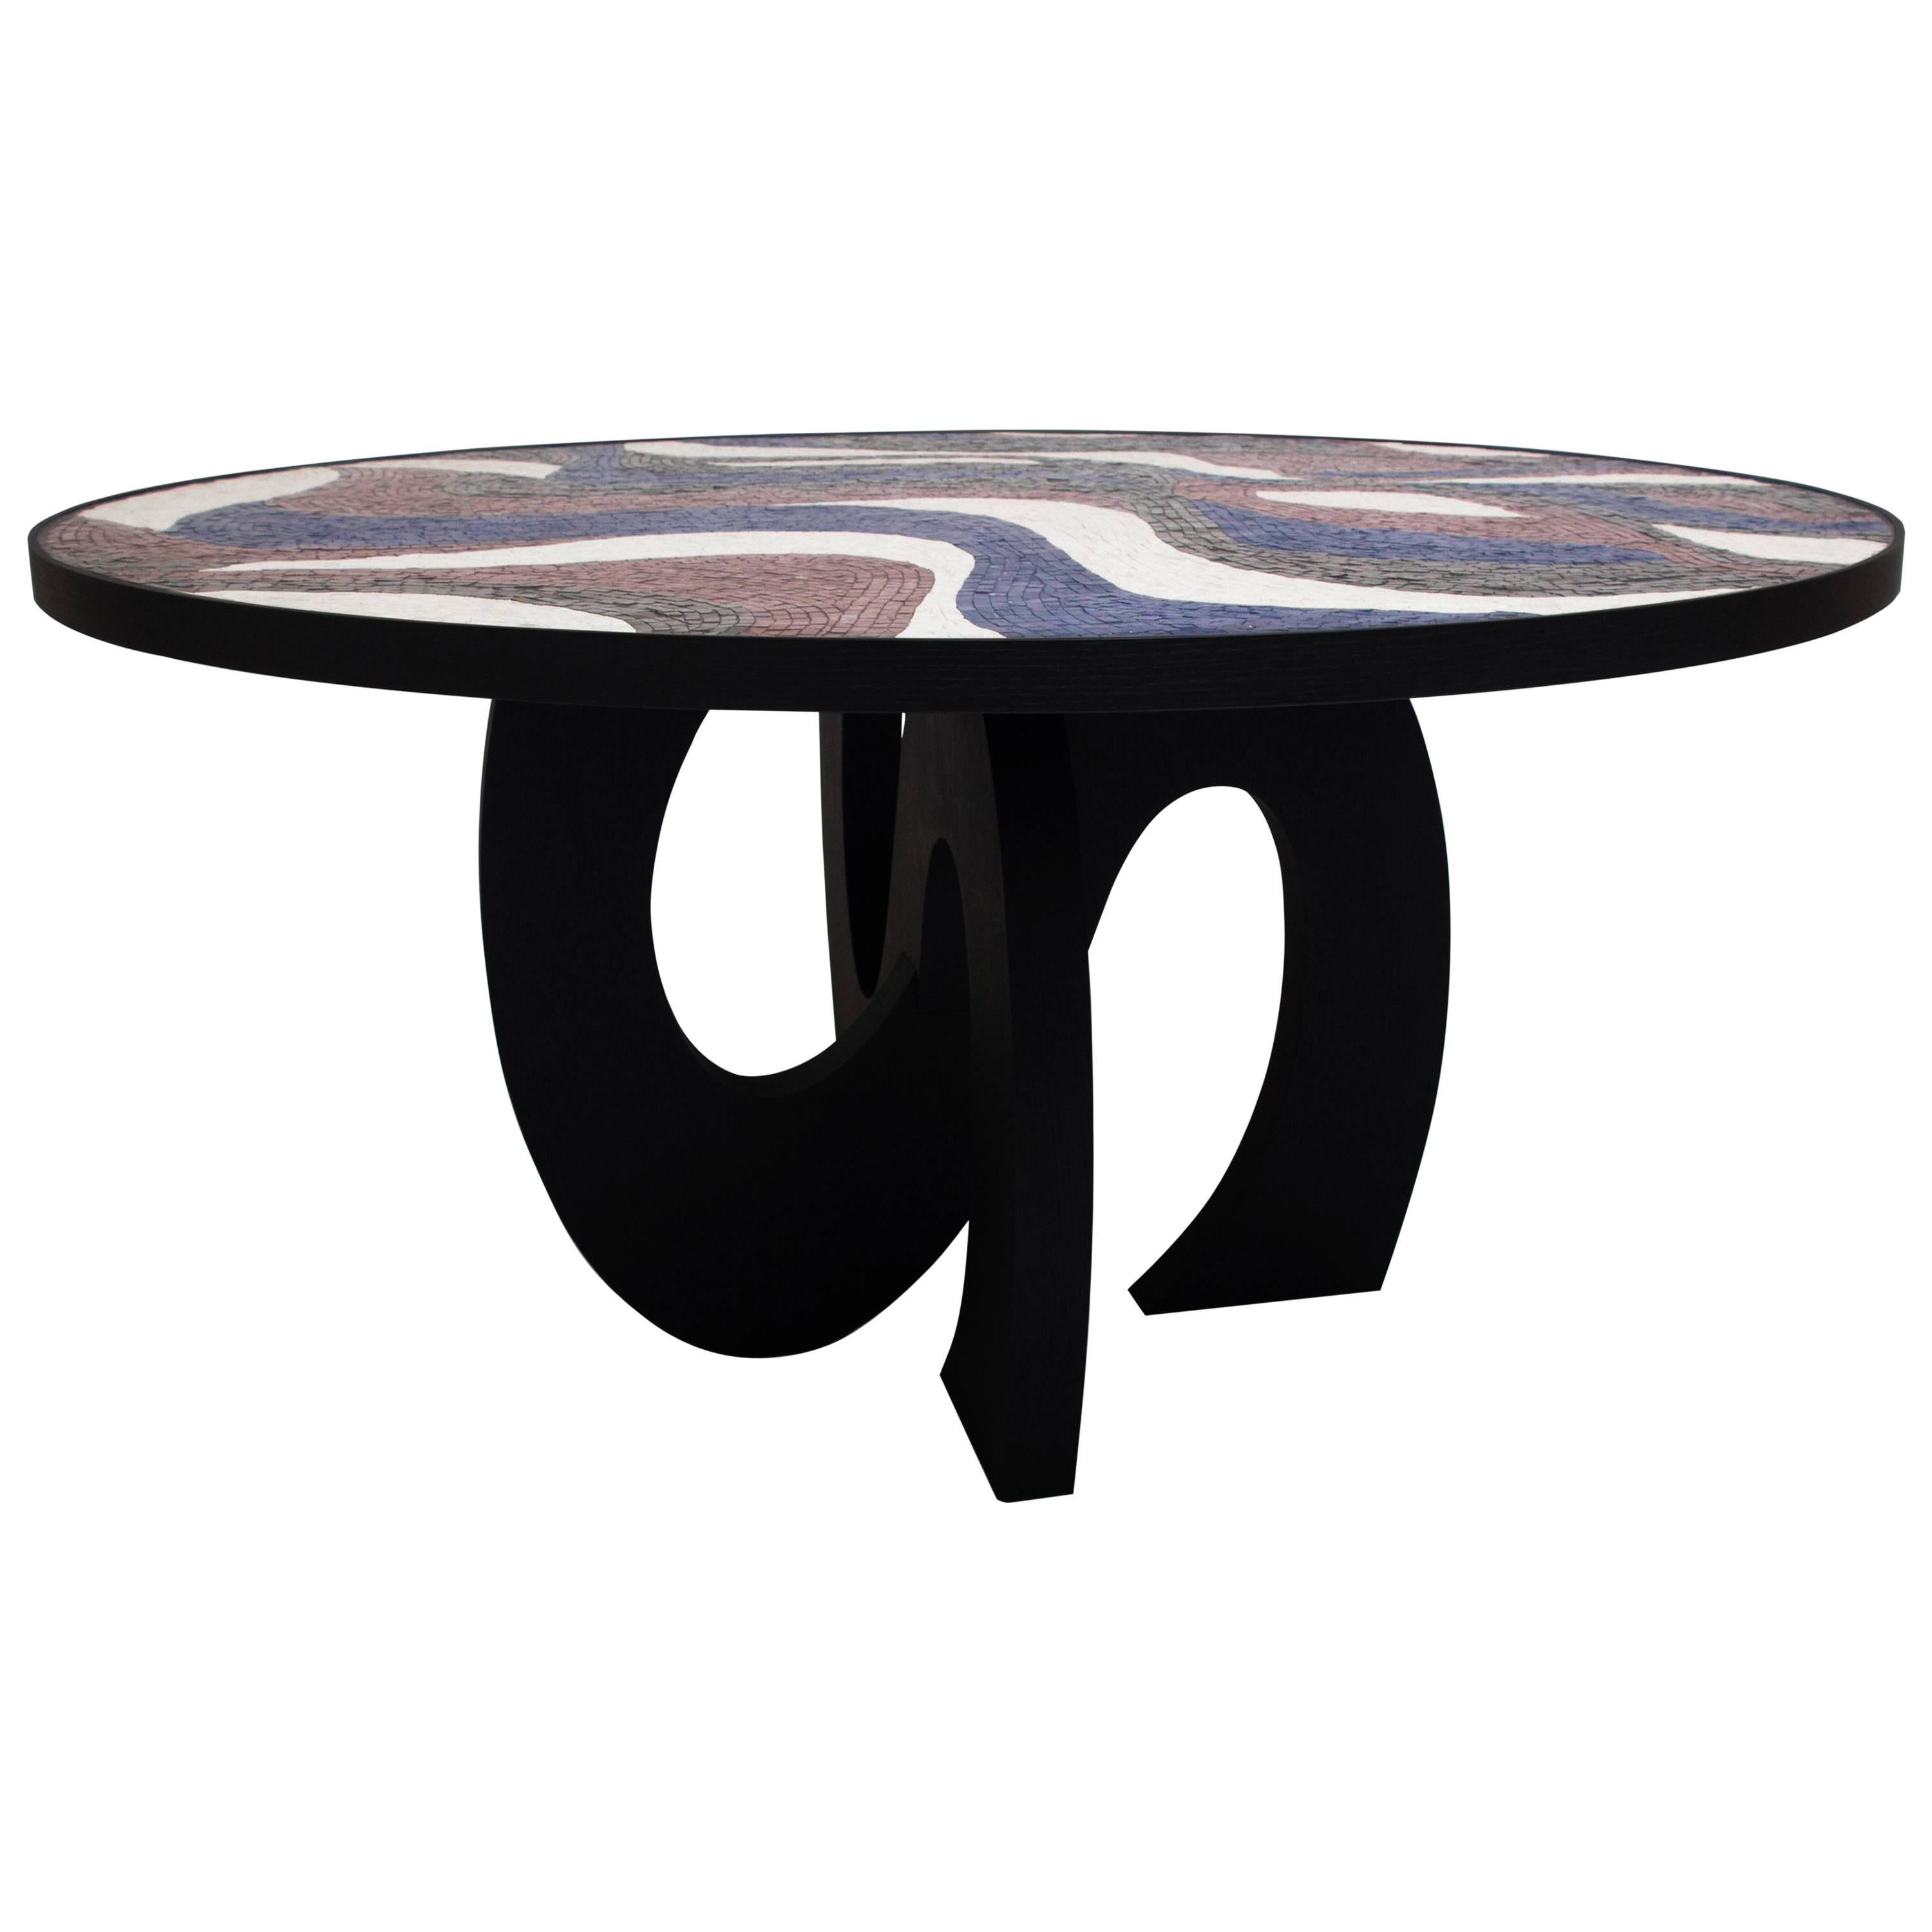 Center or dining table featuring custom hand-cut stone mosaic in Nero Marquina, Bottocino marble, Lebanese cherry and Blue Quartz with black stained wood base by Kelly Behun Studio. 
60